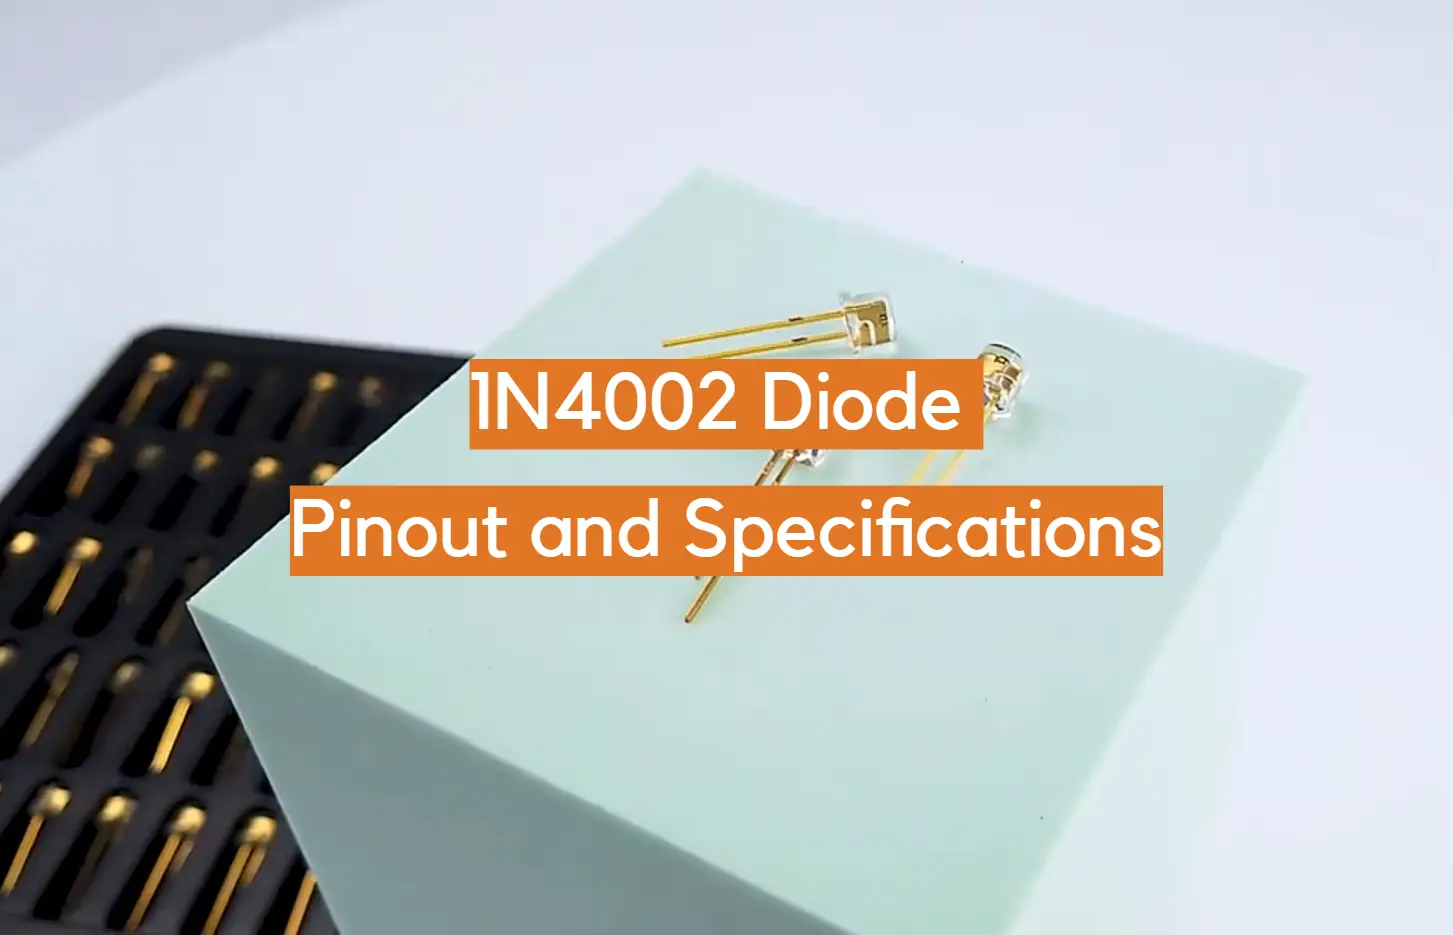 1N4002 Diode Pinout and Specifications